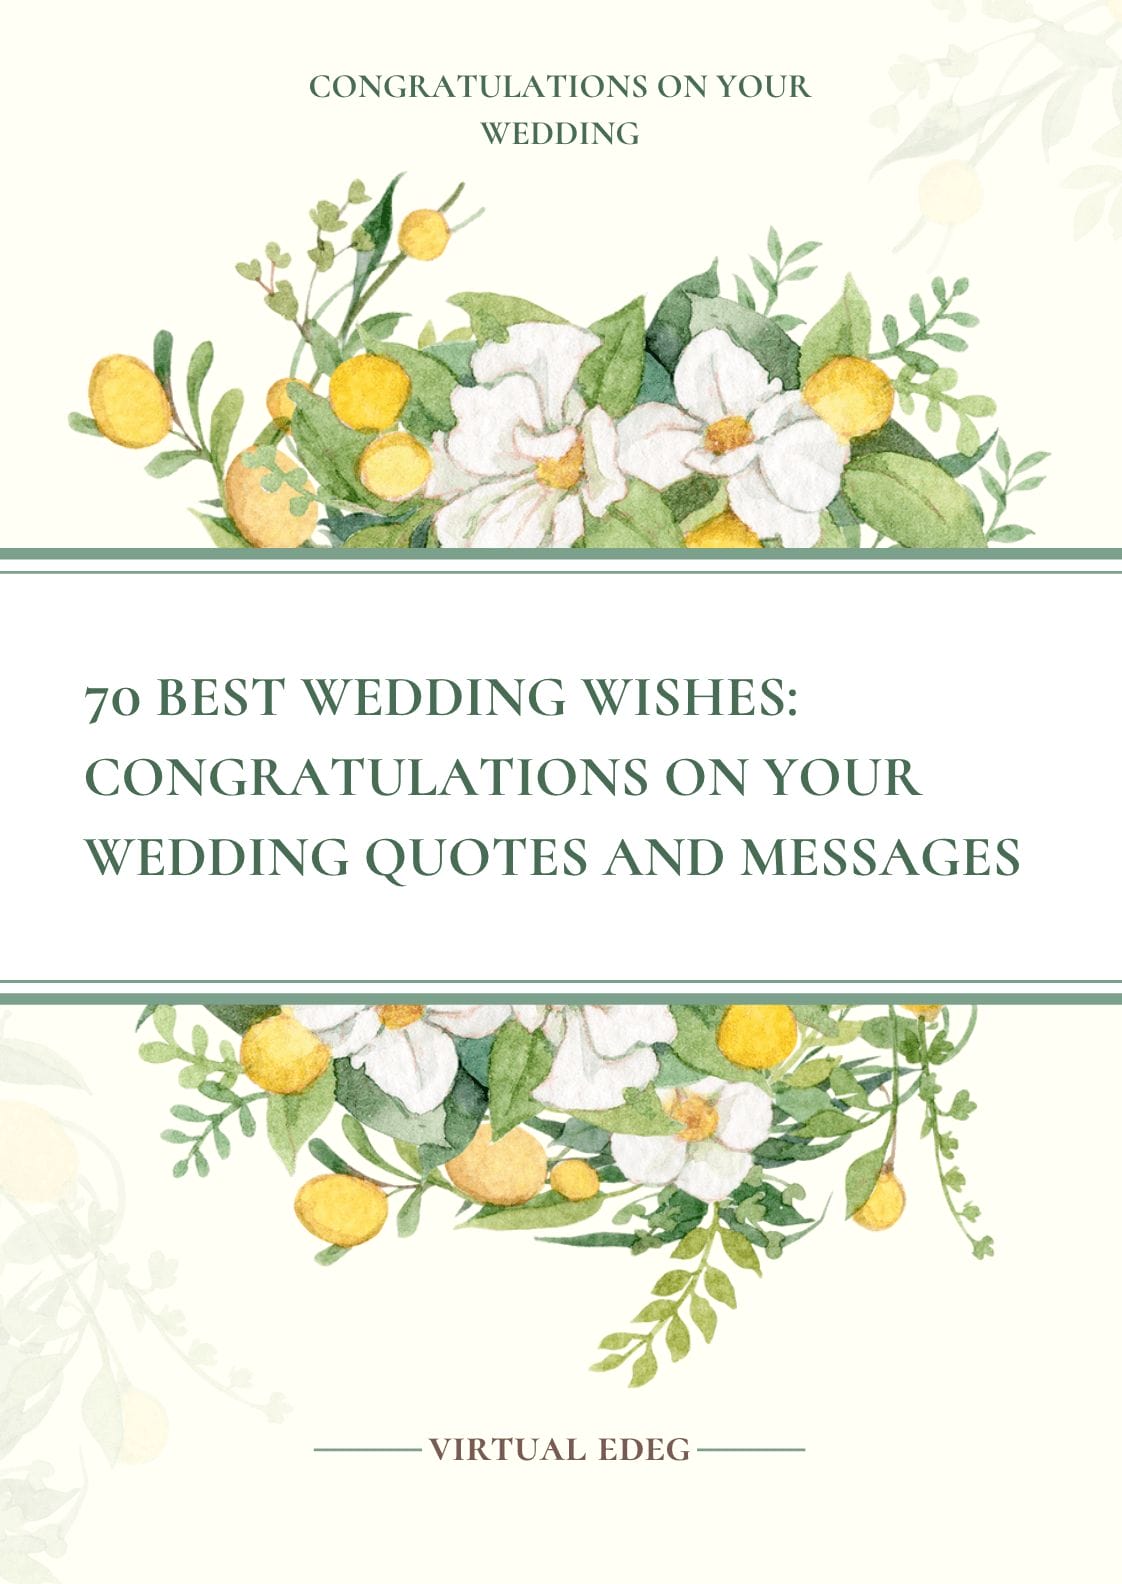 70 Best Wedding Wishes: Congratulations on Your Wedding Quotes and ...